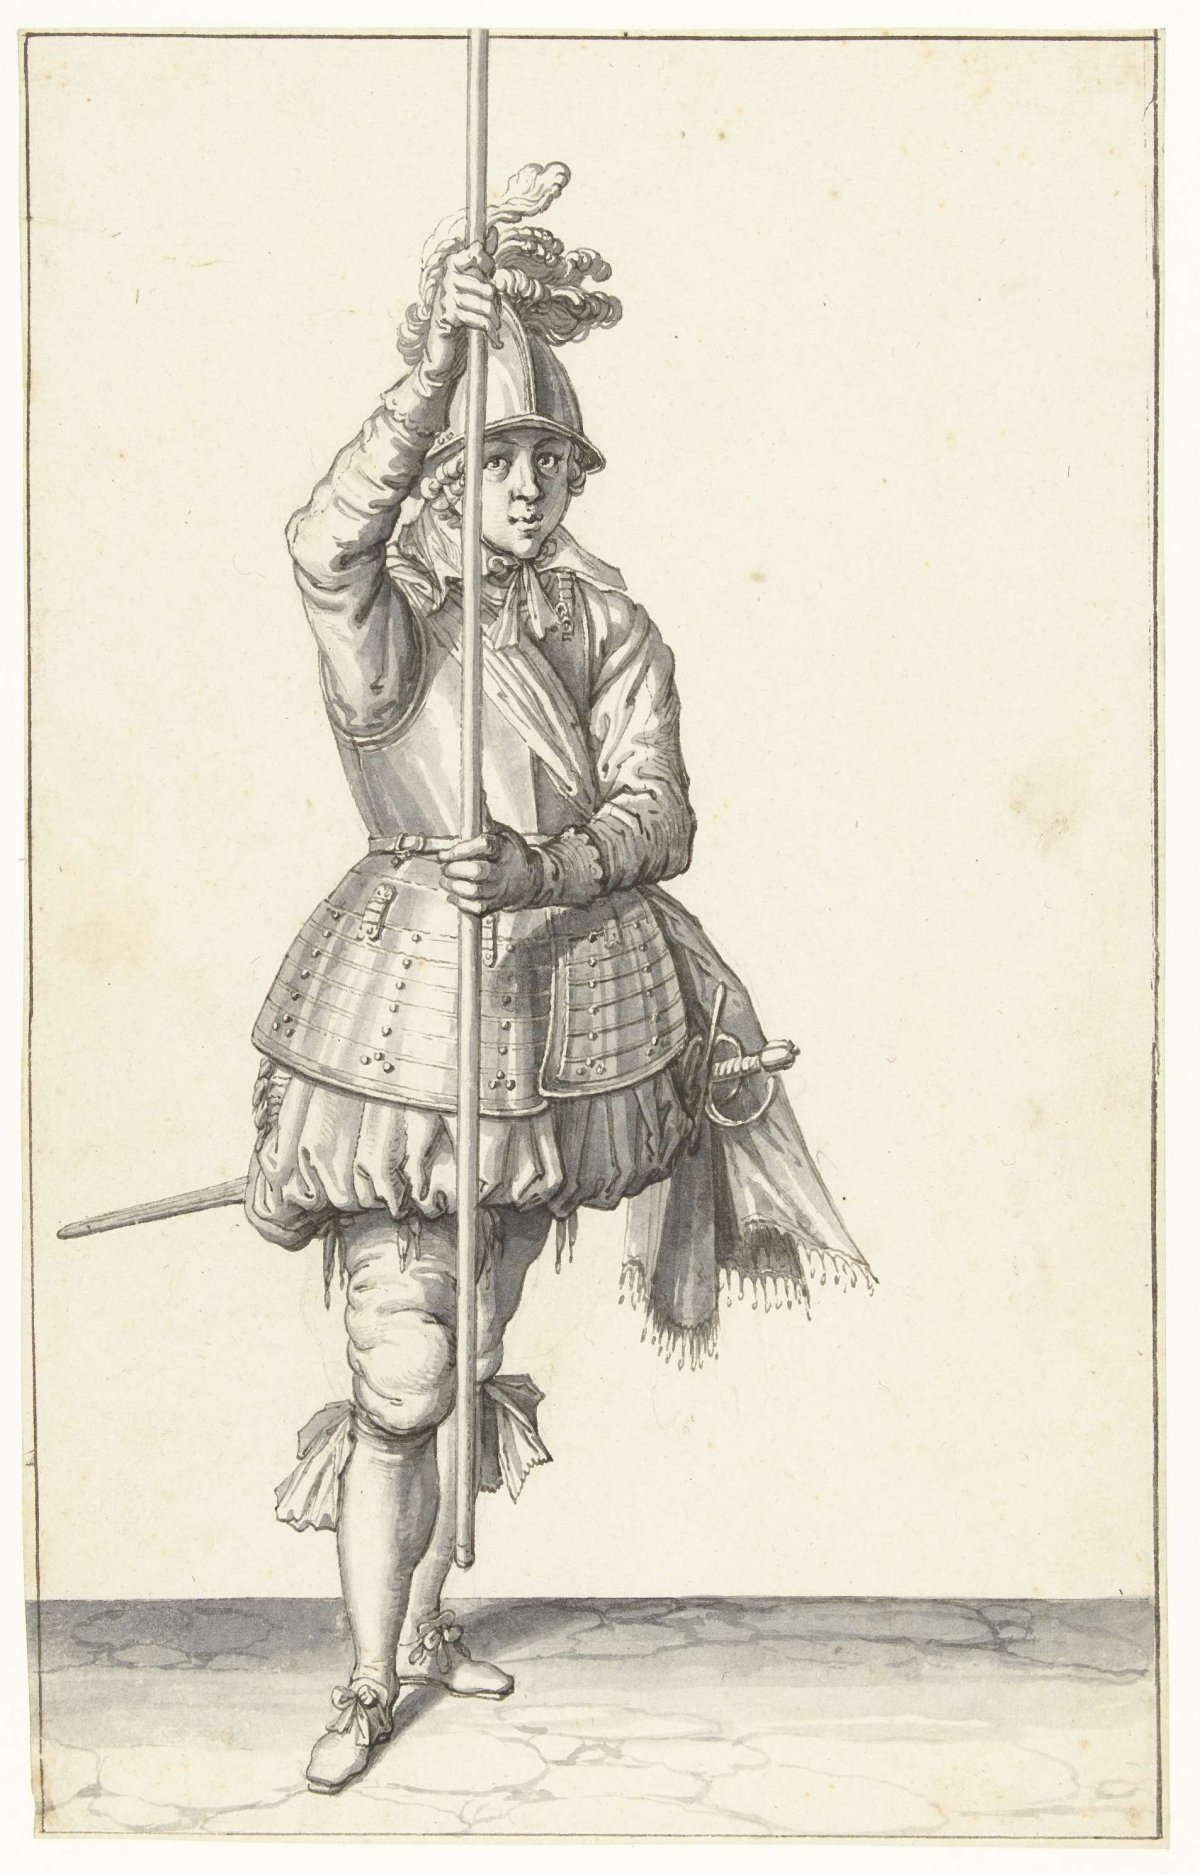 Soldier, seen from the front, holding his spear with both hands upright in front of him slightly above the ground, Jacques de Gheyn (II), 1596 - 1606